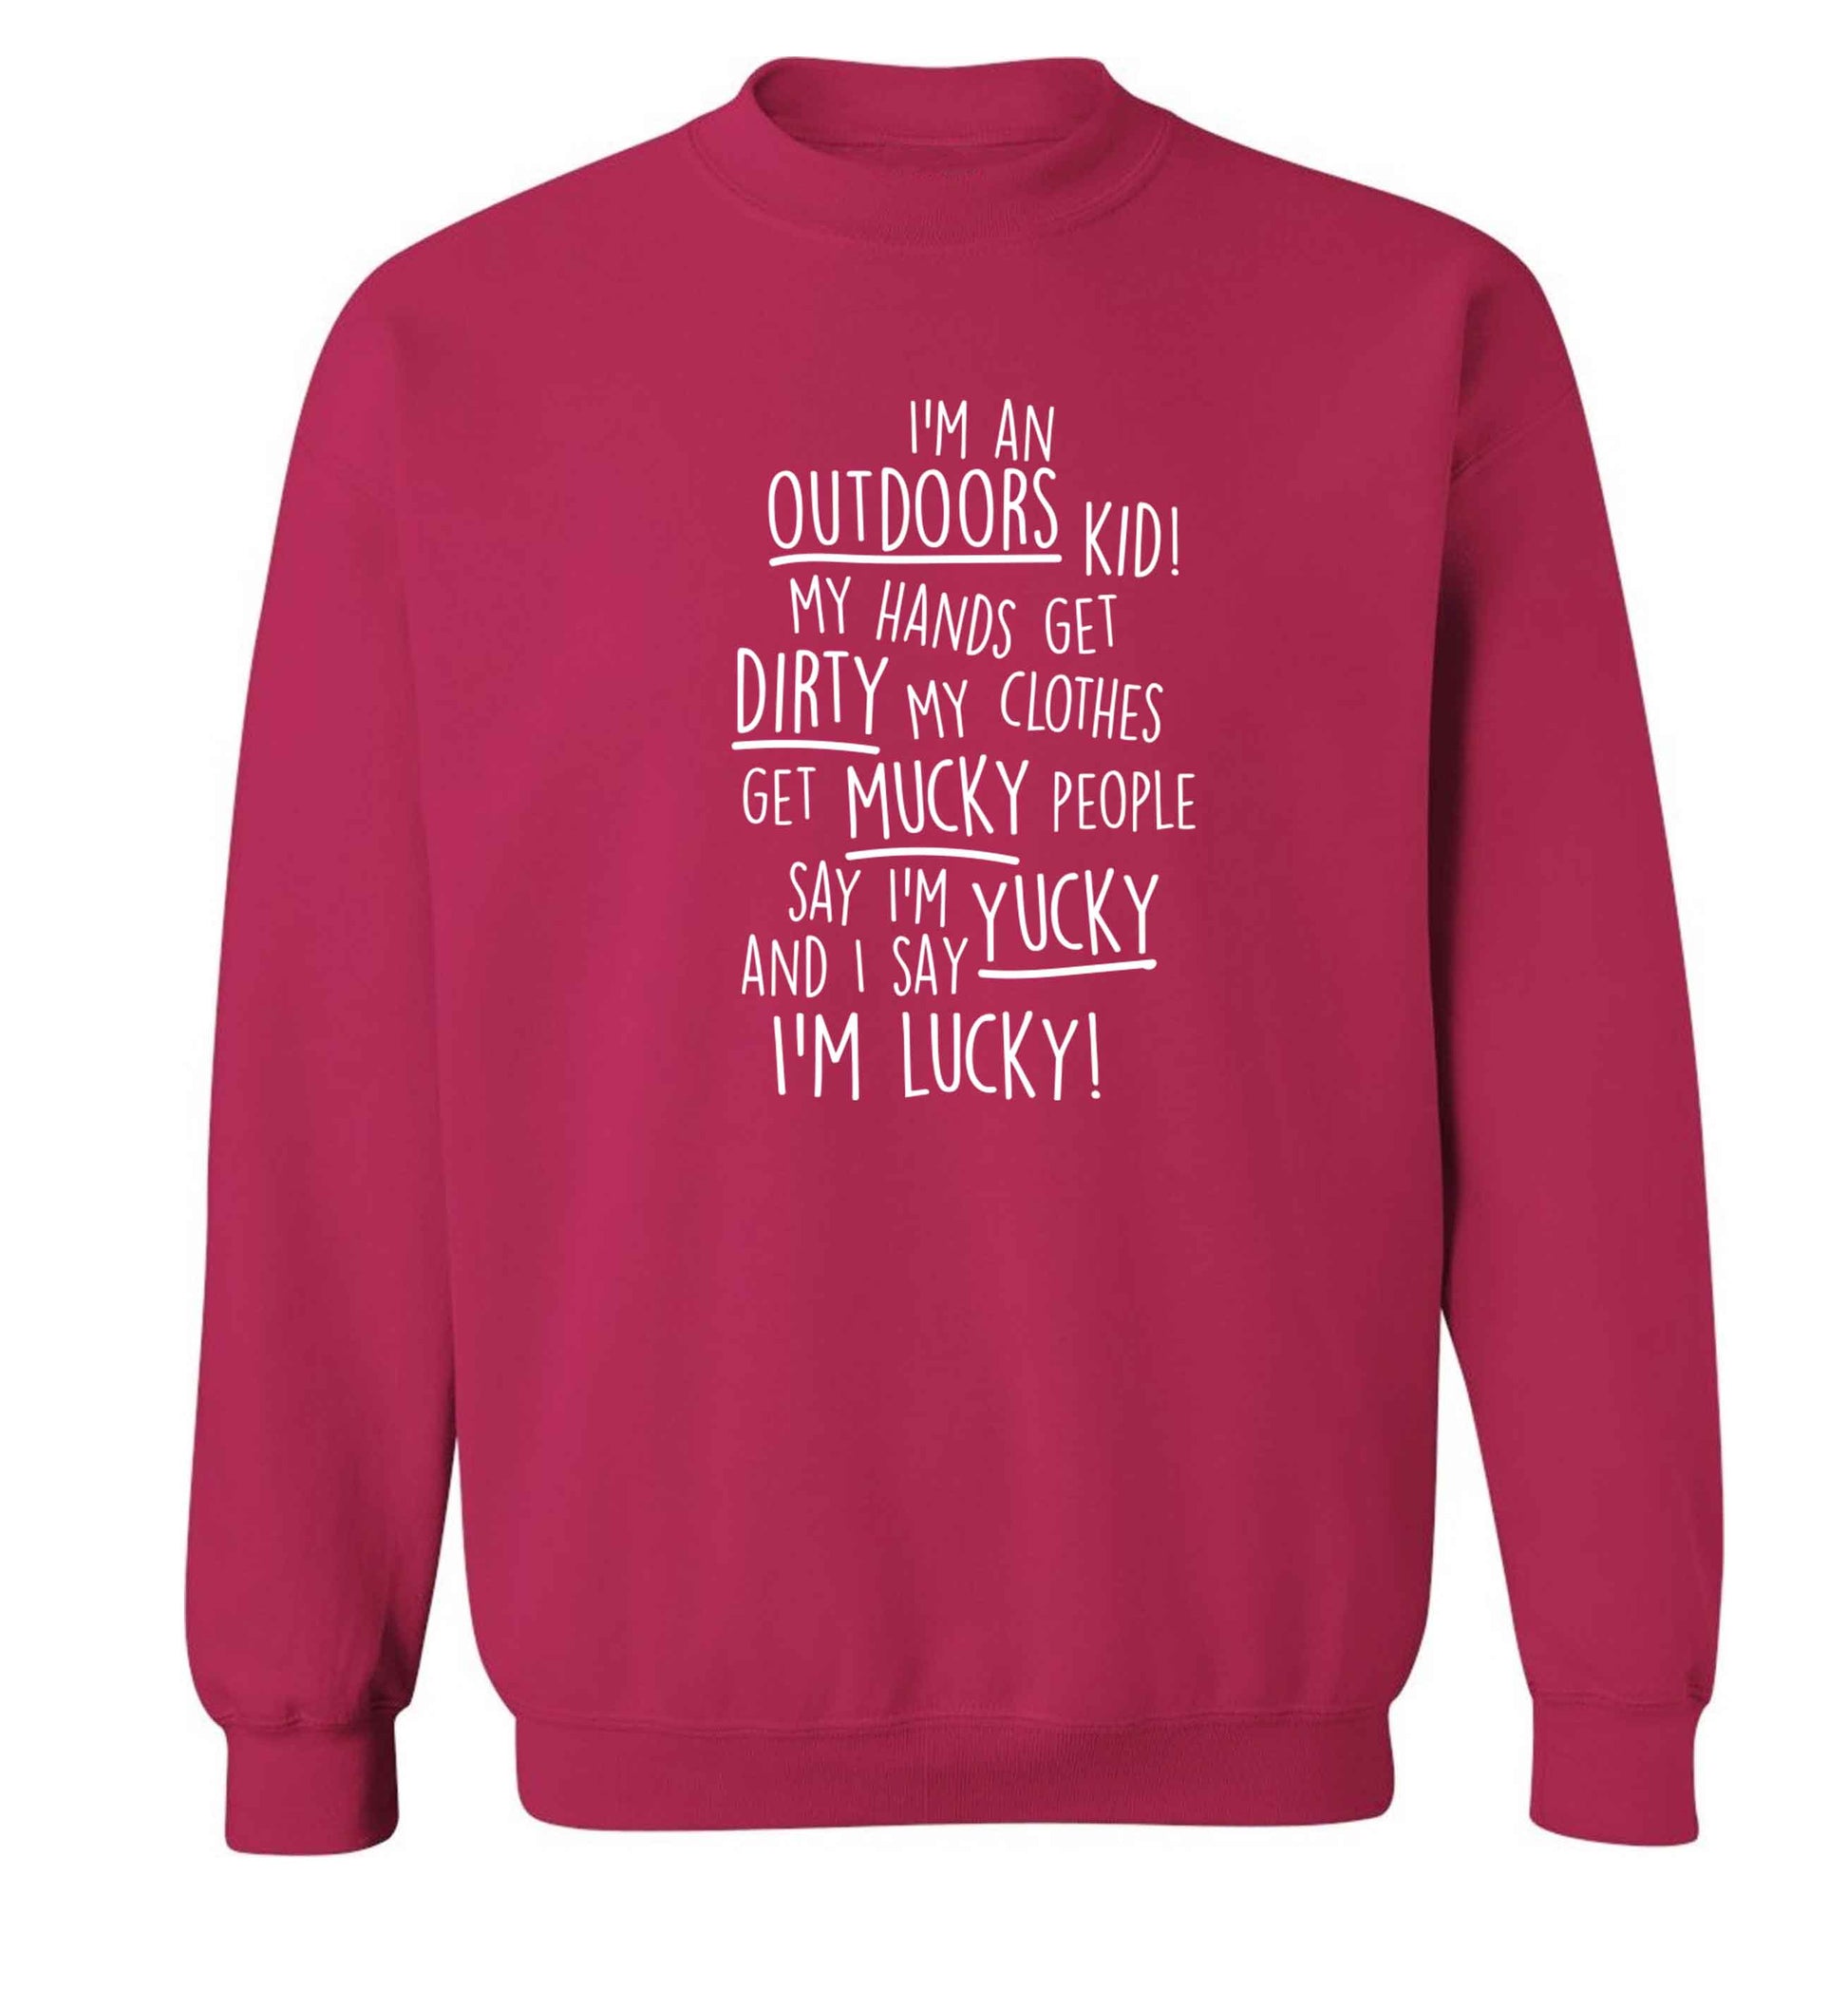 I'm an outdoors kid poem Adult's unisex pink Sweater 2XL